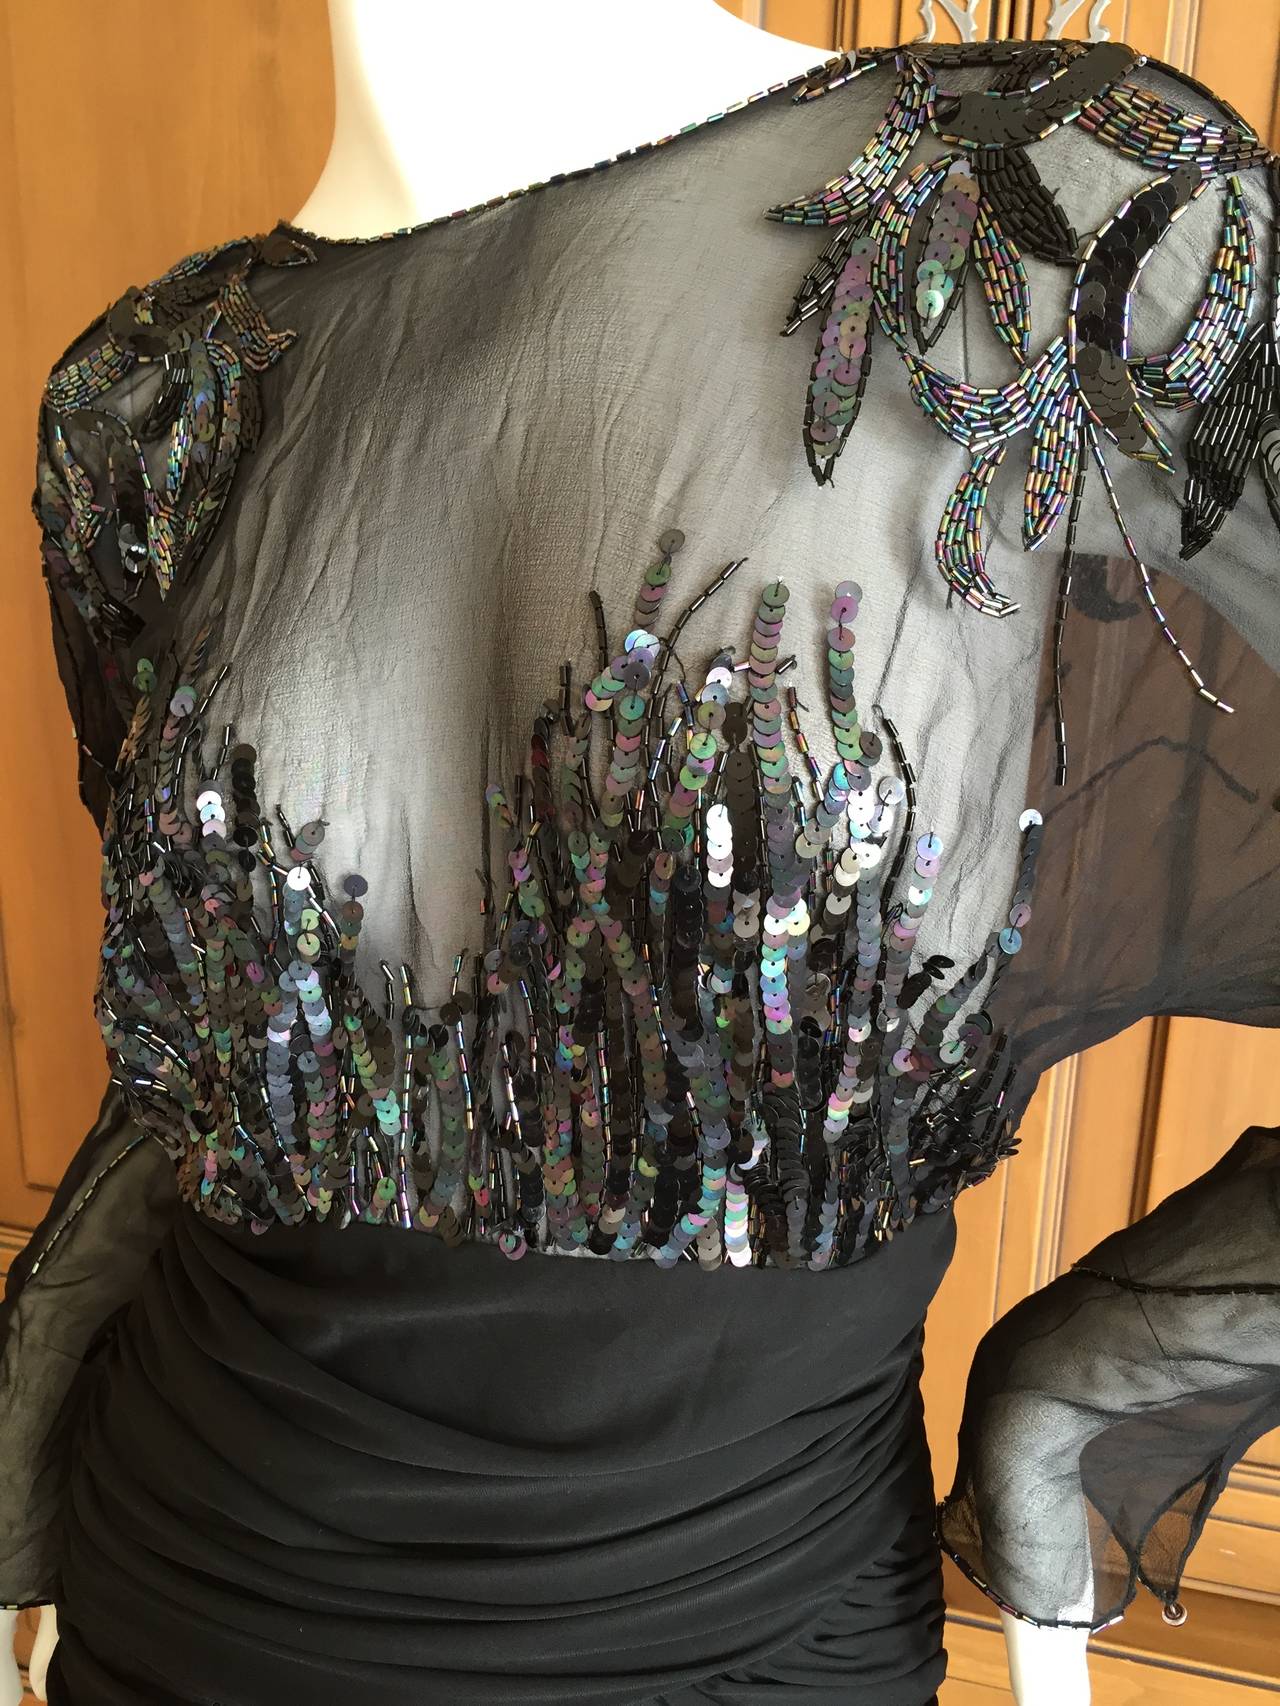 Bob Mackie Sexy Disco Era Sheer Sequin Little Black Dress from Saks Fifth Avenue Circa 1978
This is amazing, very daring.
The skirt is a beautiful draped black jersey, the top is sheer, beaded as only Mackie can.
No size tag this is a small size